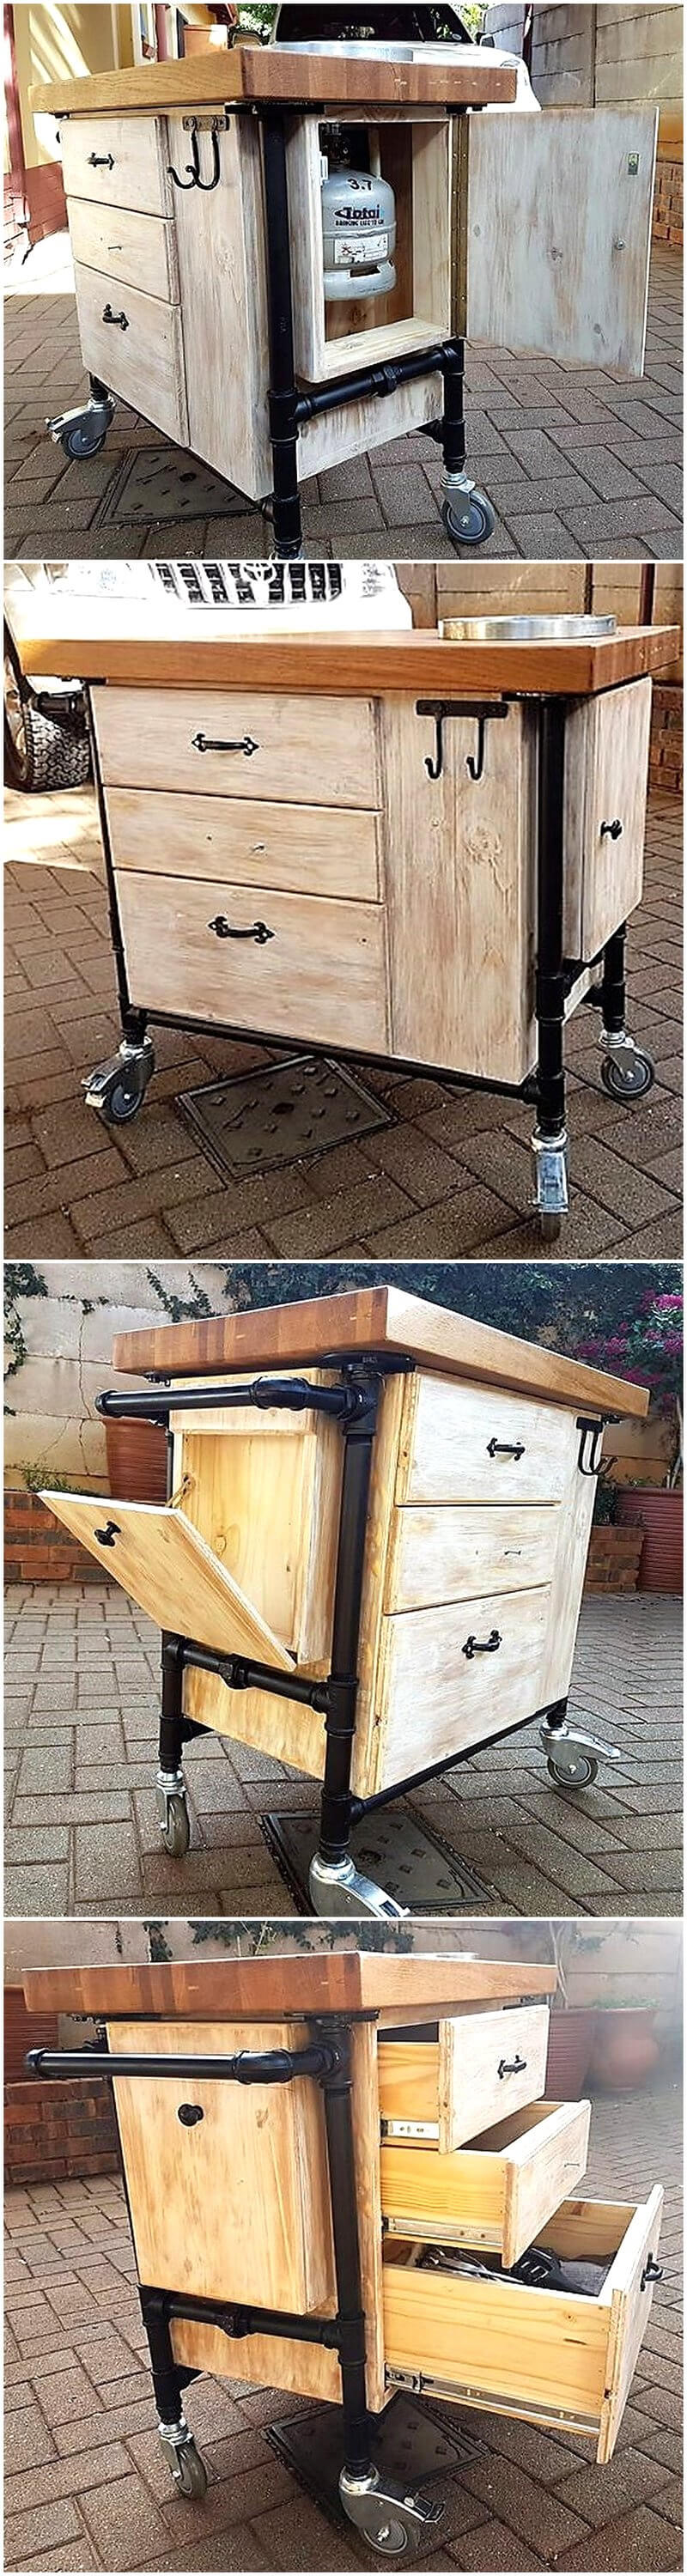 wooden pallets kitchen or patio trolley